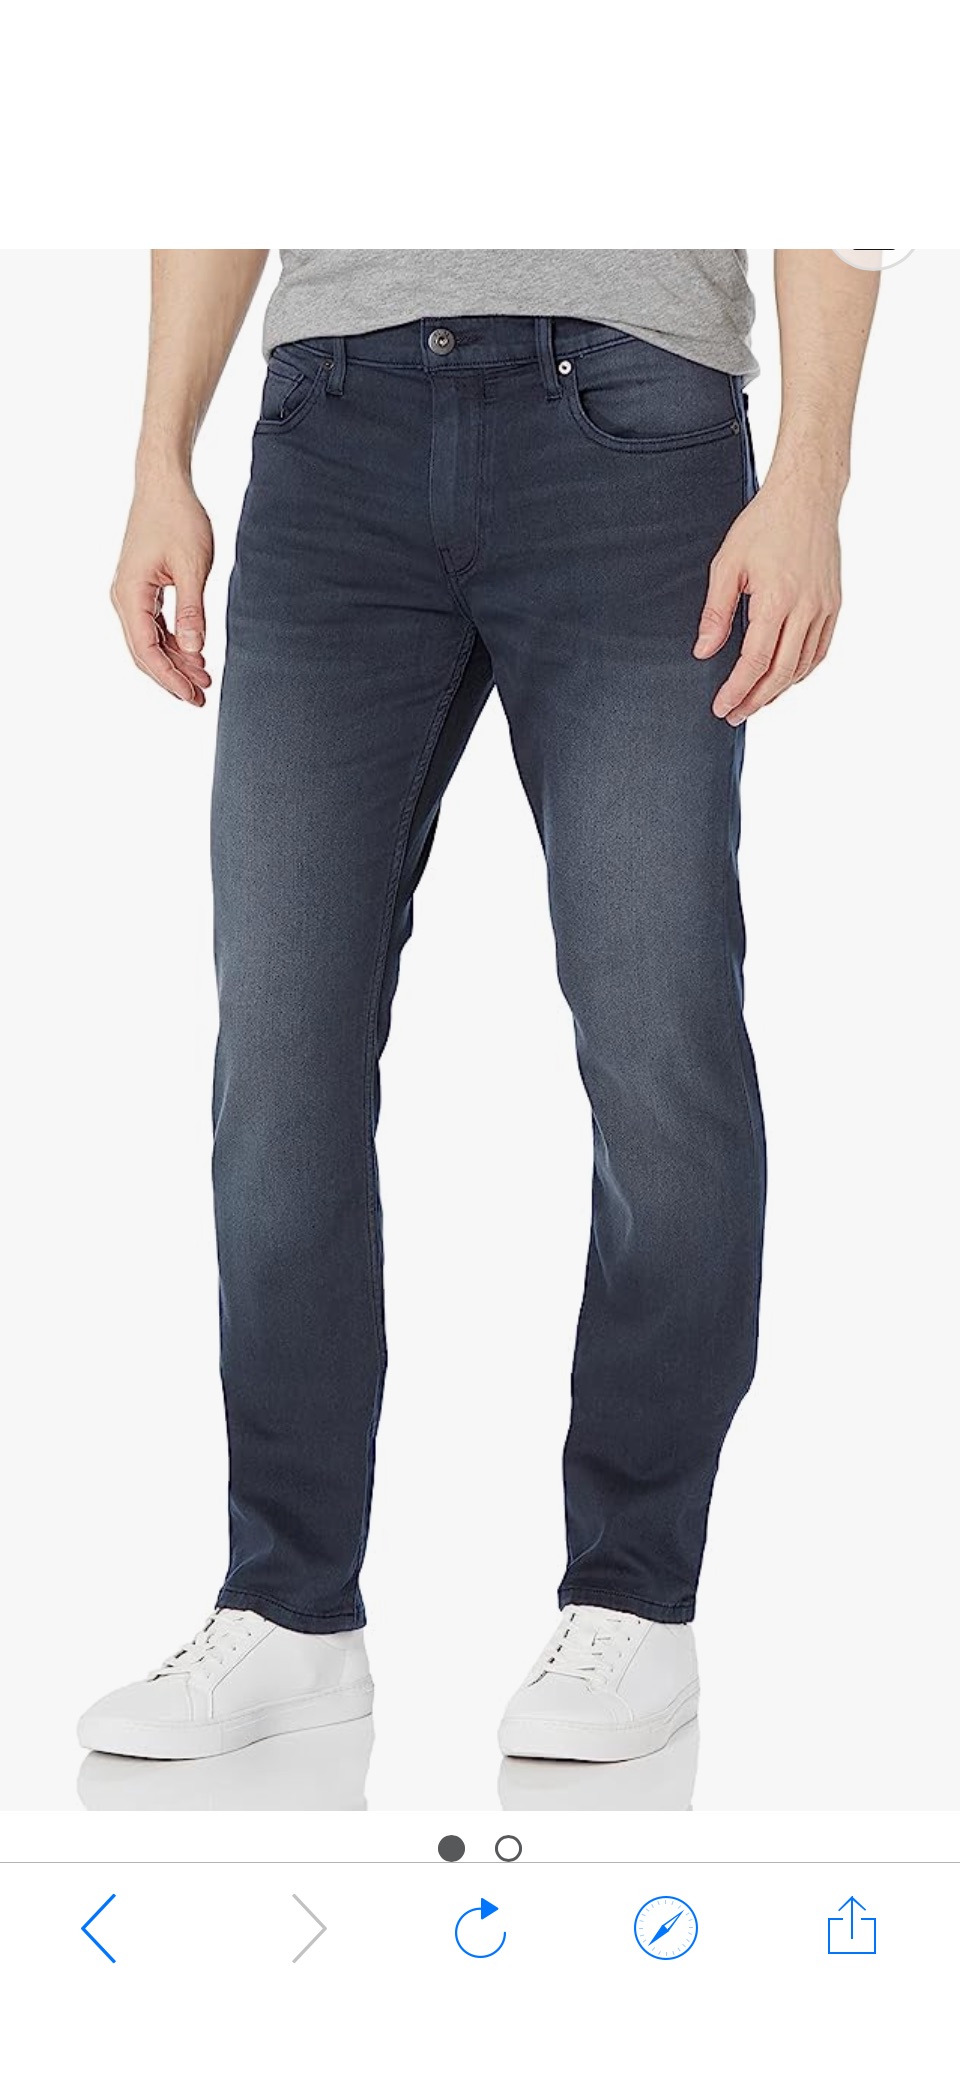 PAIGE Men's Federal Transcend Slim Straight Fit Jean, Cashin, 30 at Amazon Men’s Clothing store原价199.99